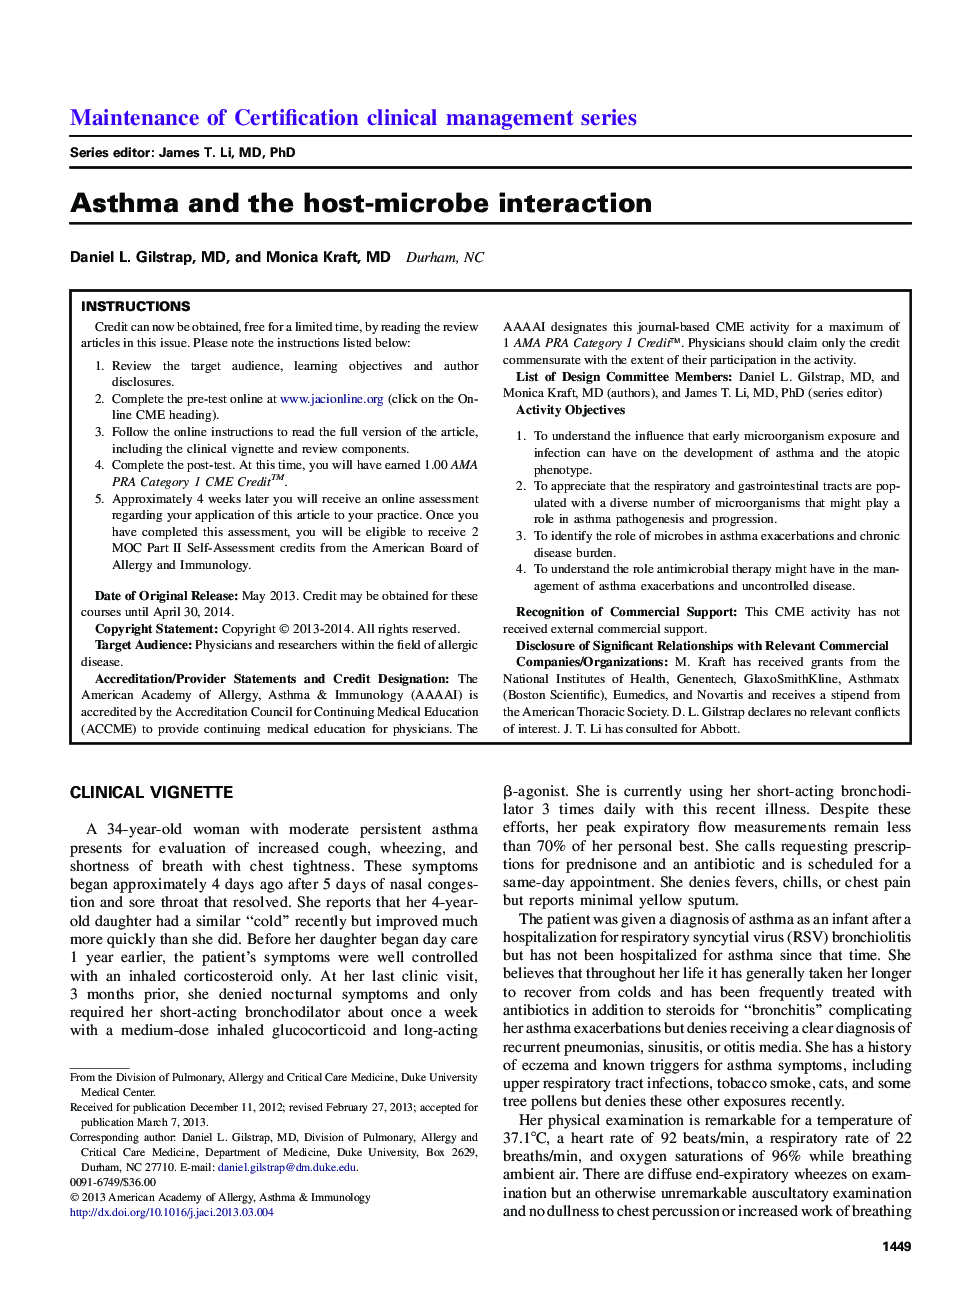 Asthma and the host-microbe interaction